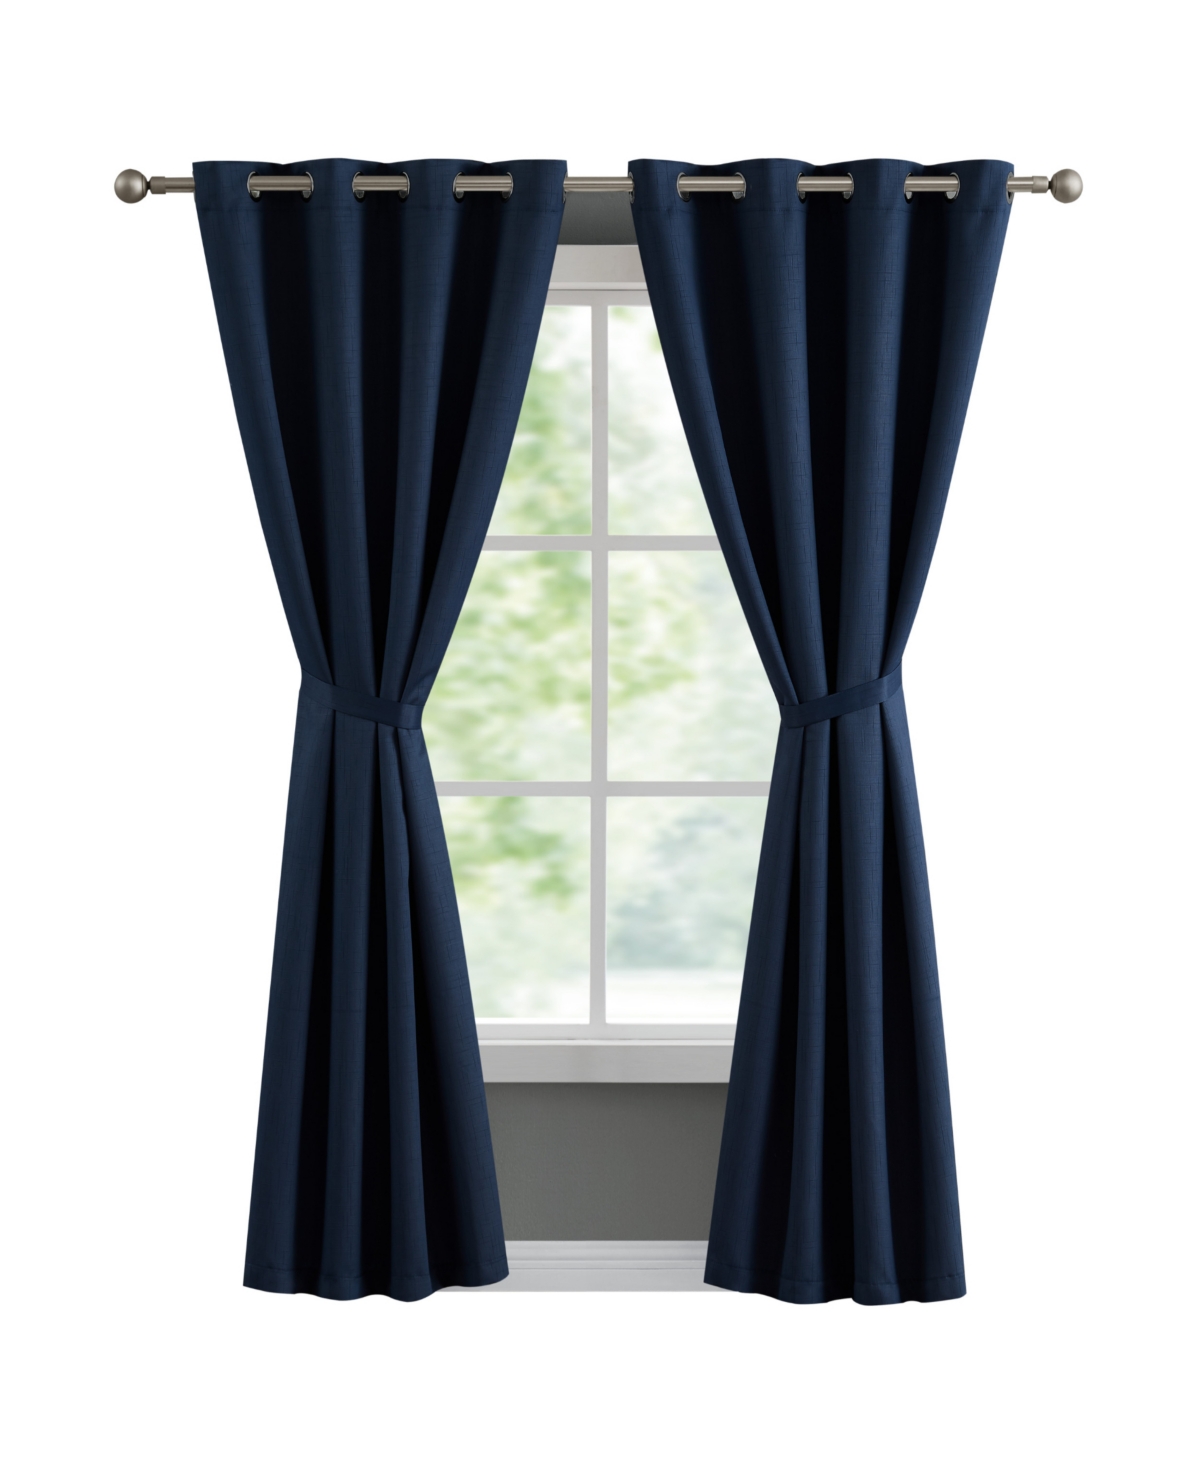 French Connection Ebony Thermal Woven Room Darkening Grommet Window Curtain Panel Pair With Tiebacks, 50" X 84" In Indigo